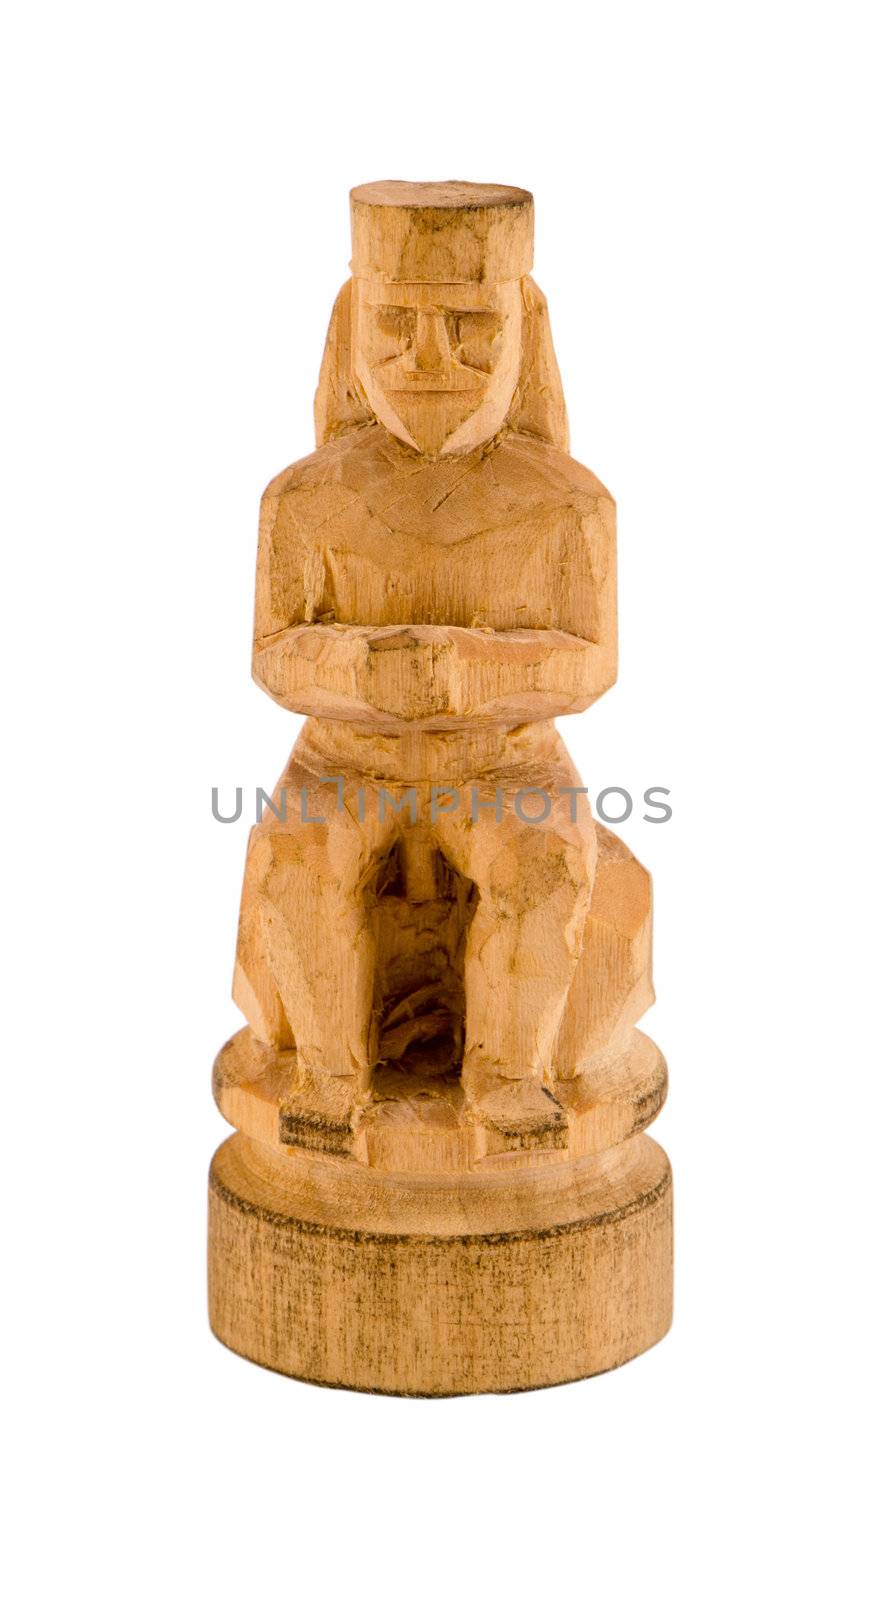 priest statue carved handmade wood piece isolated by sauletas